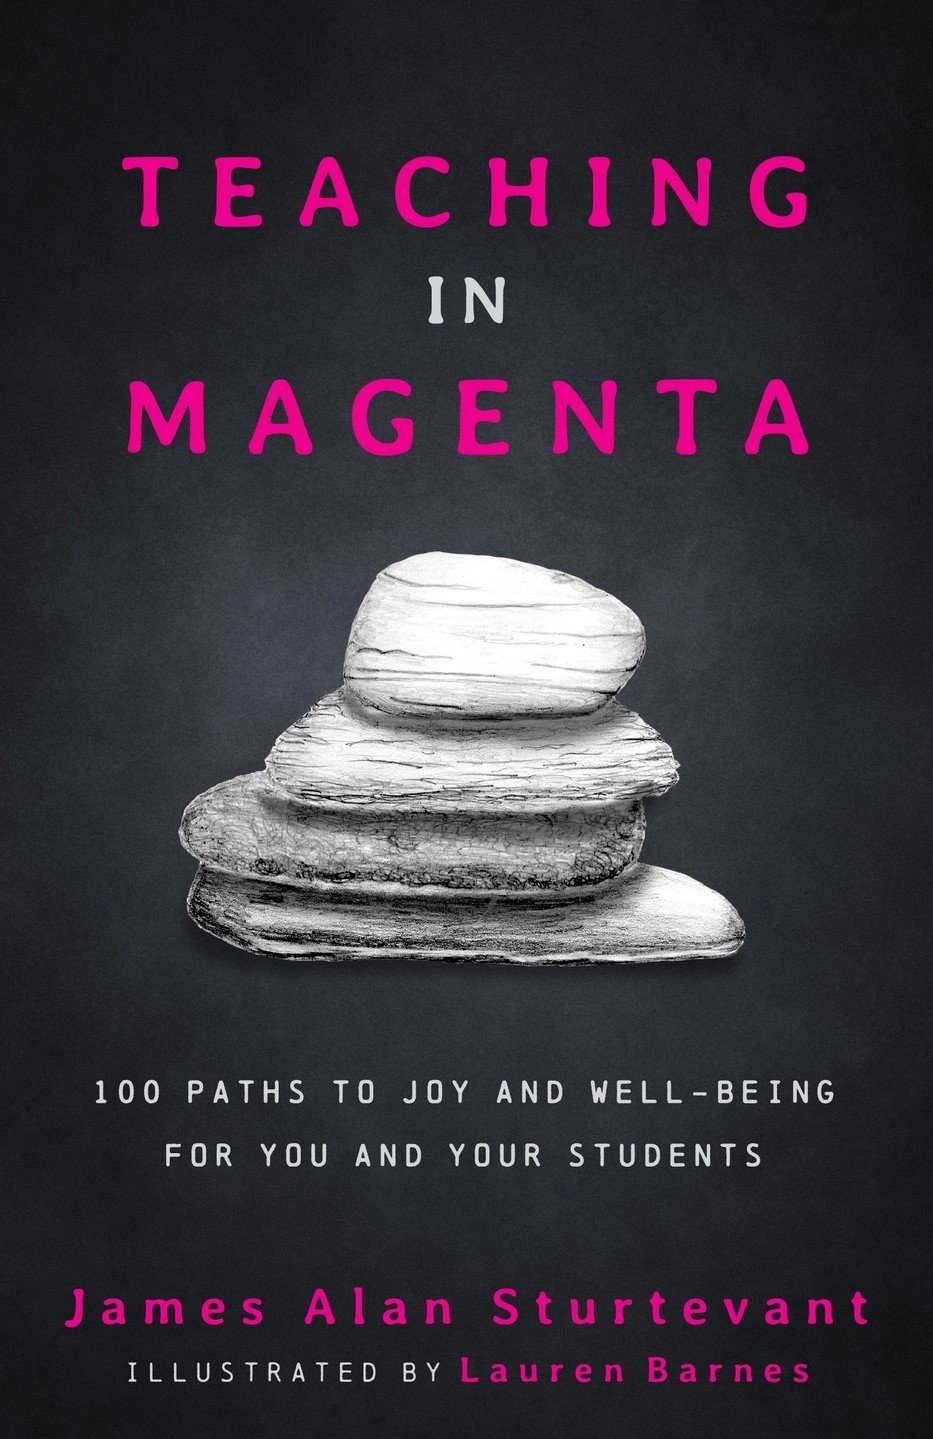 Become A Magenta Teacher With Book On Being Excited & Engaged In The Classroom